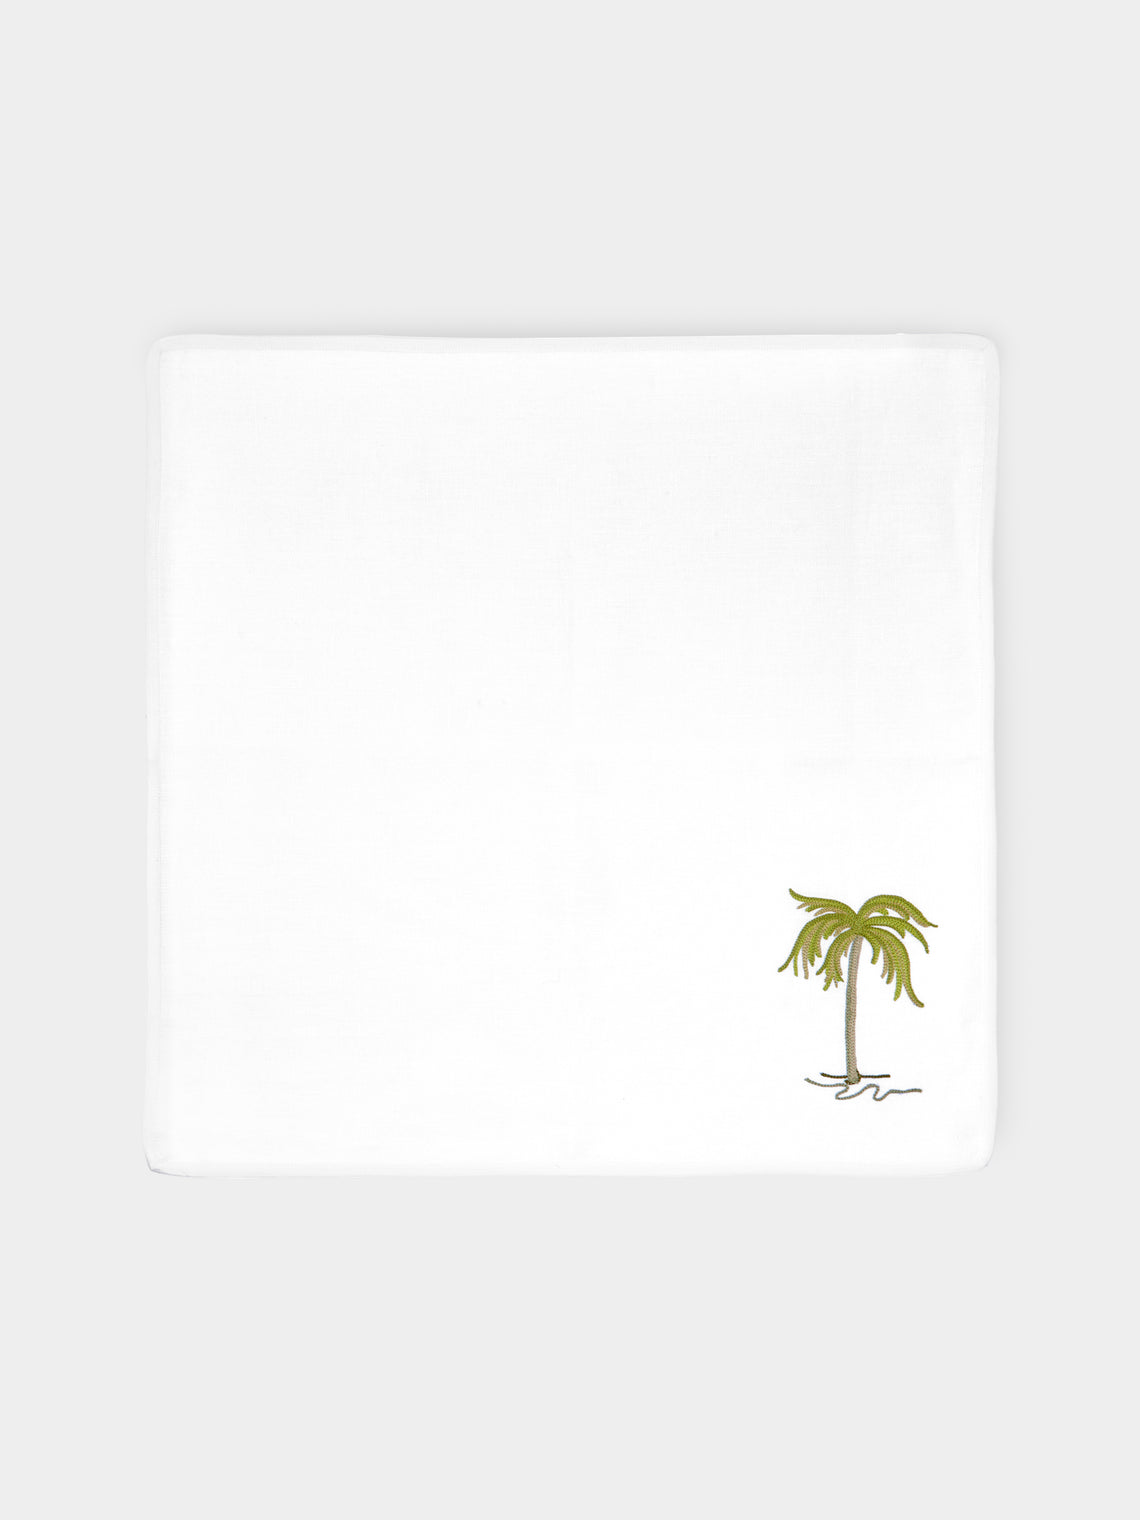 Loretta Caponi - Palm Tree Hand-Embroidered Linen Napkins (Set of 2) -  - ABASK